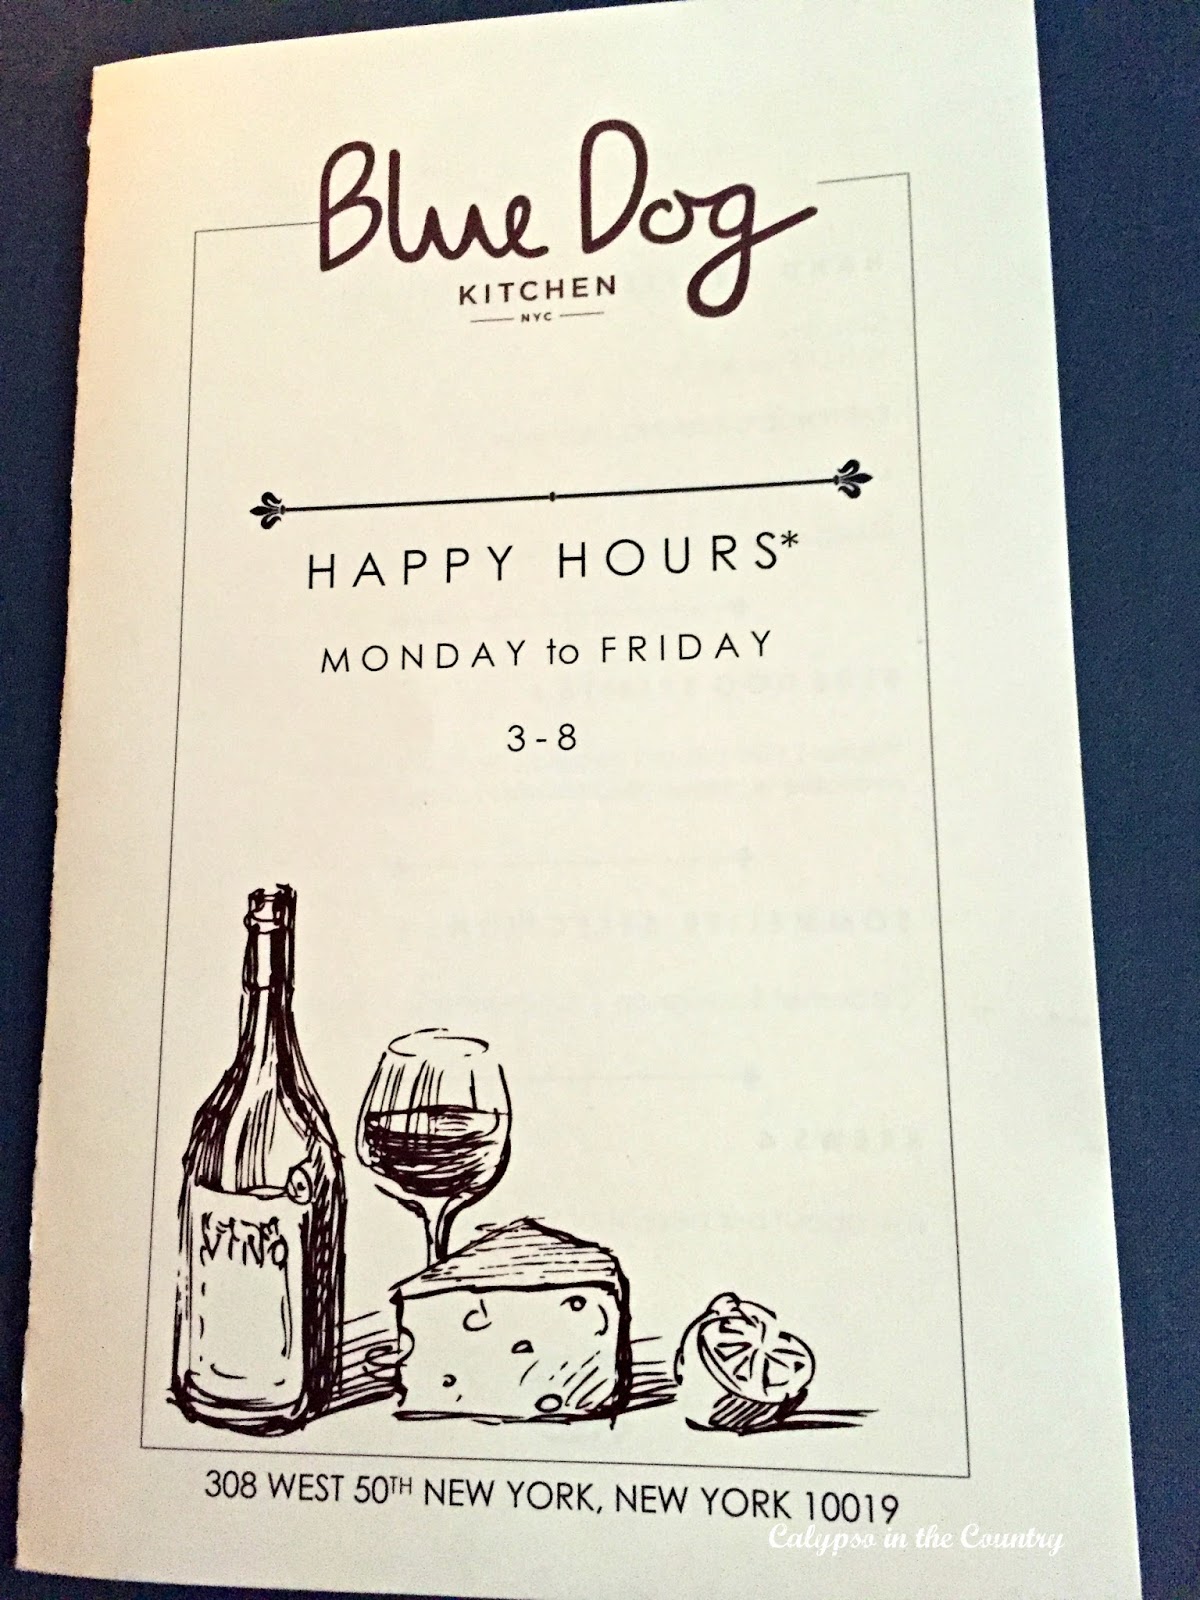 Blue Dog Kitchen - Great restaurant in the theater district NYC